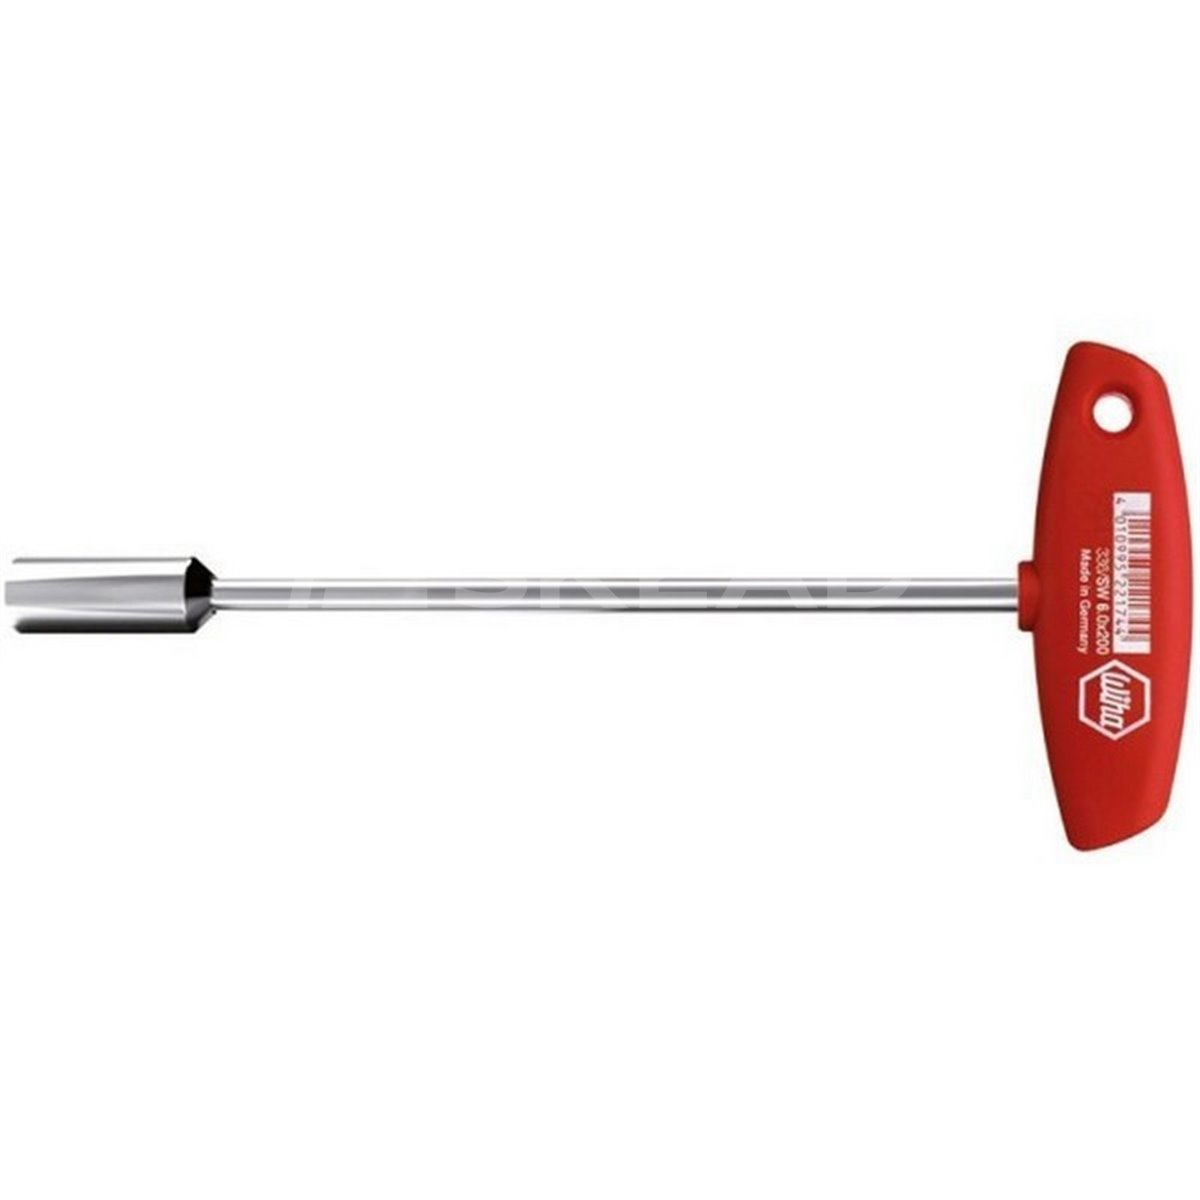 Socket wrench with T-handle. Classic 336 8 350mm Wiha 00973.